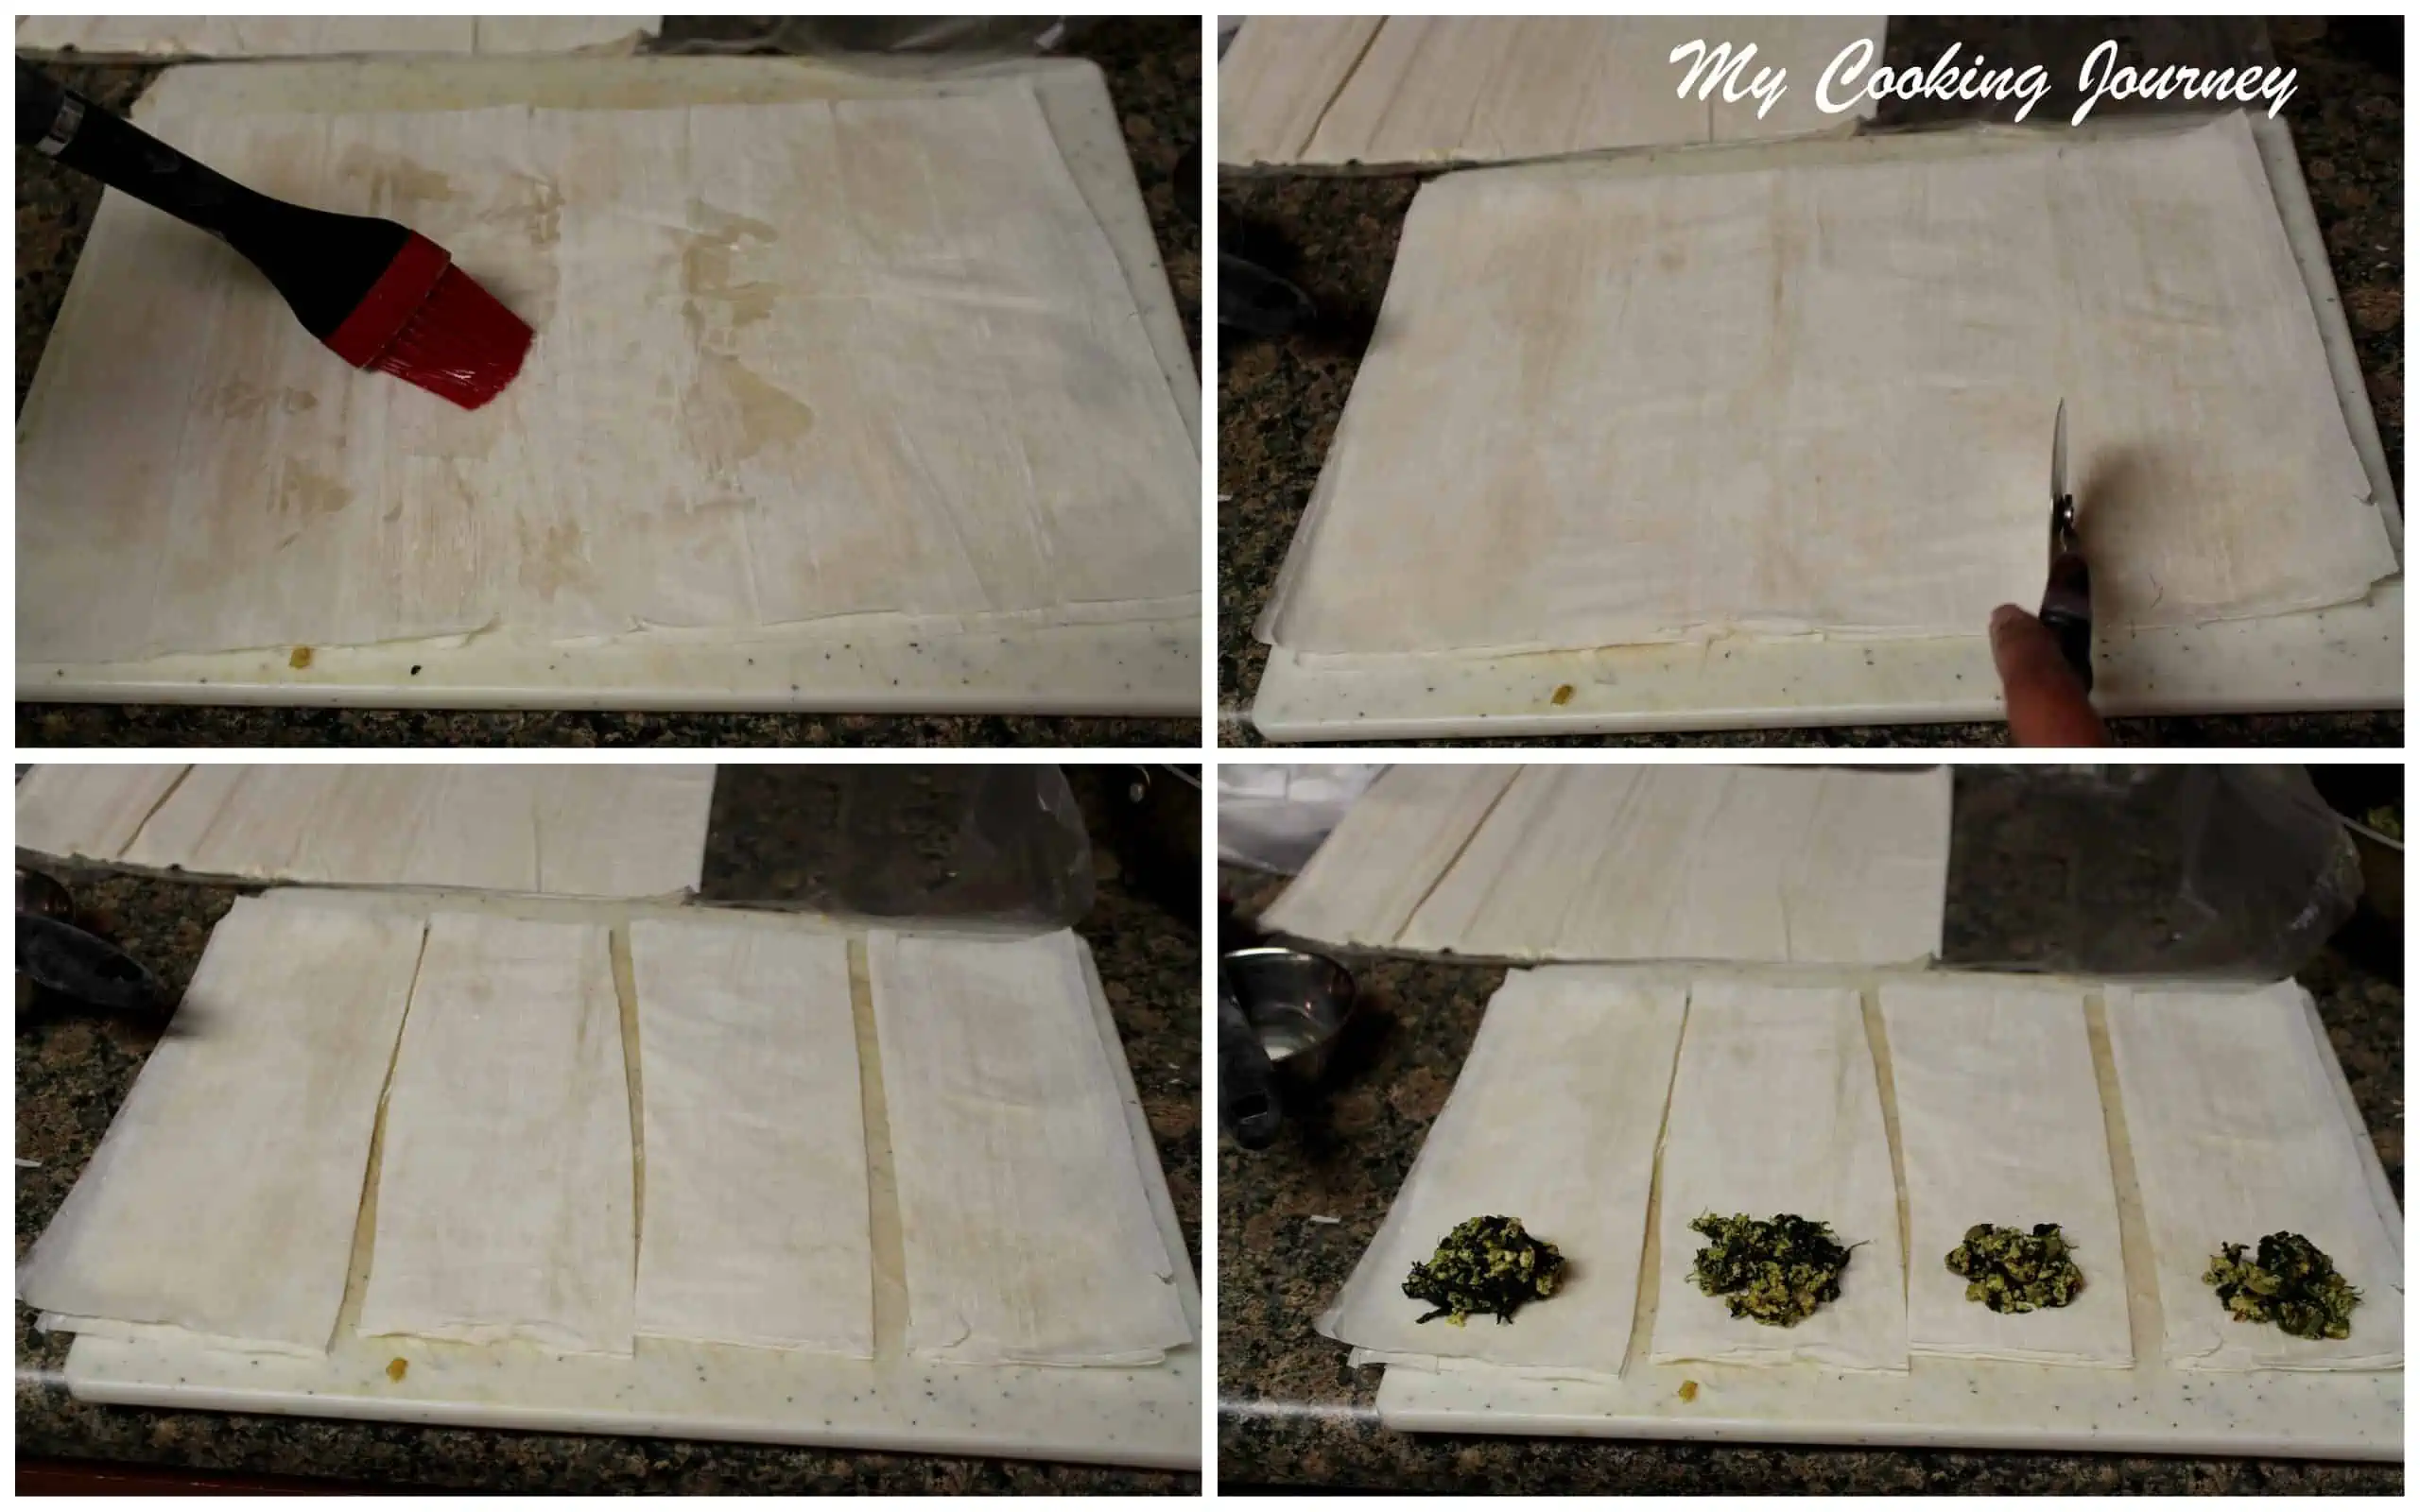 Prepping the Phyllo Sheet